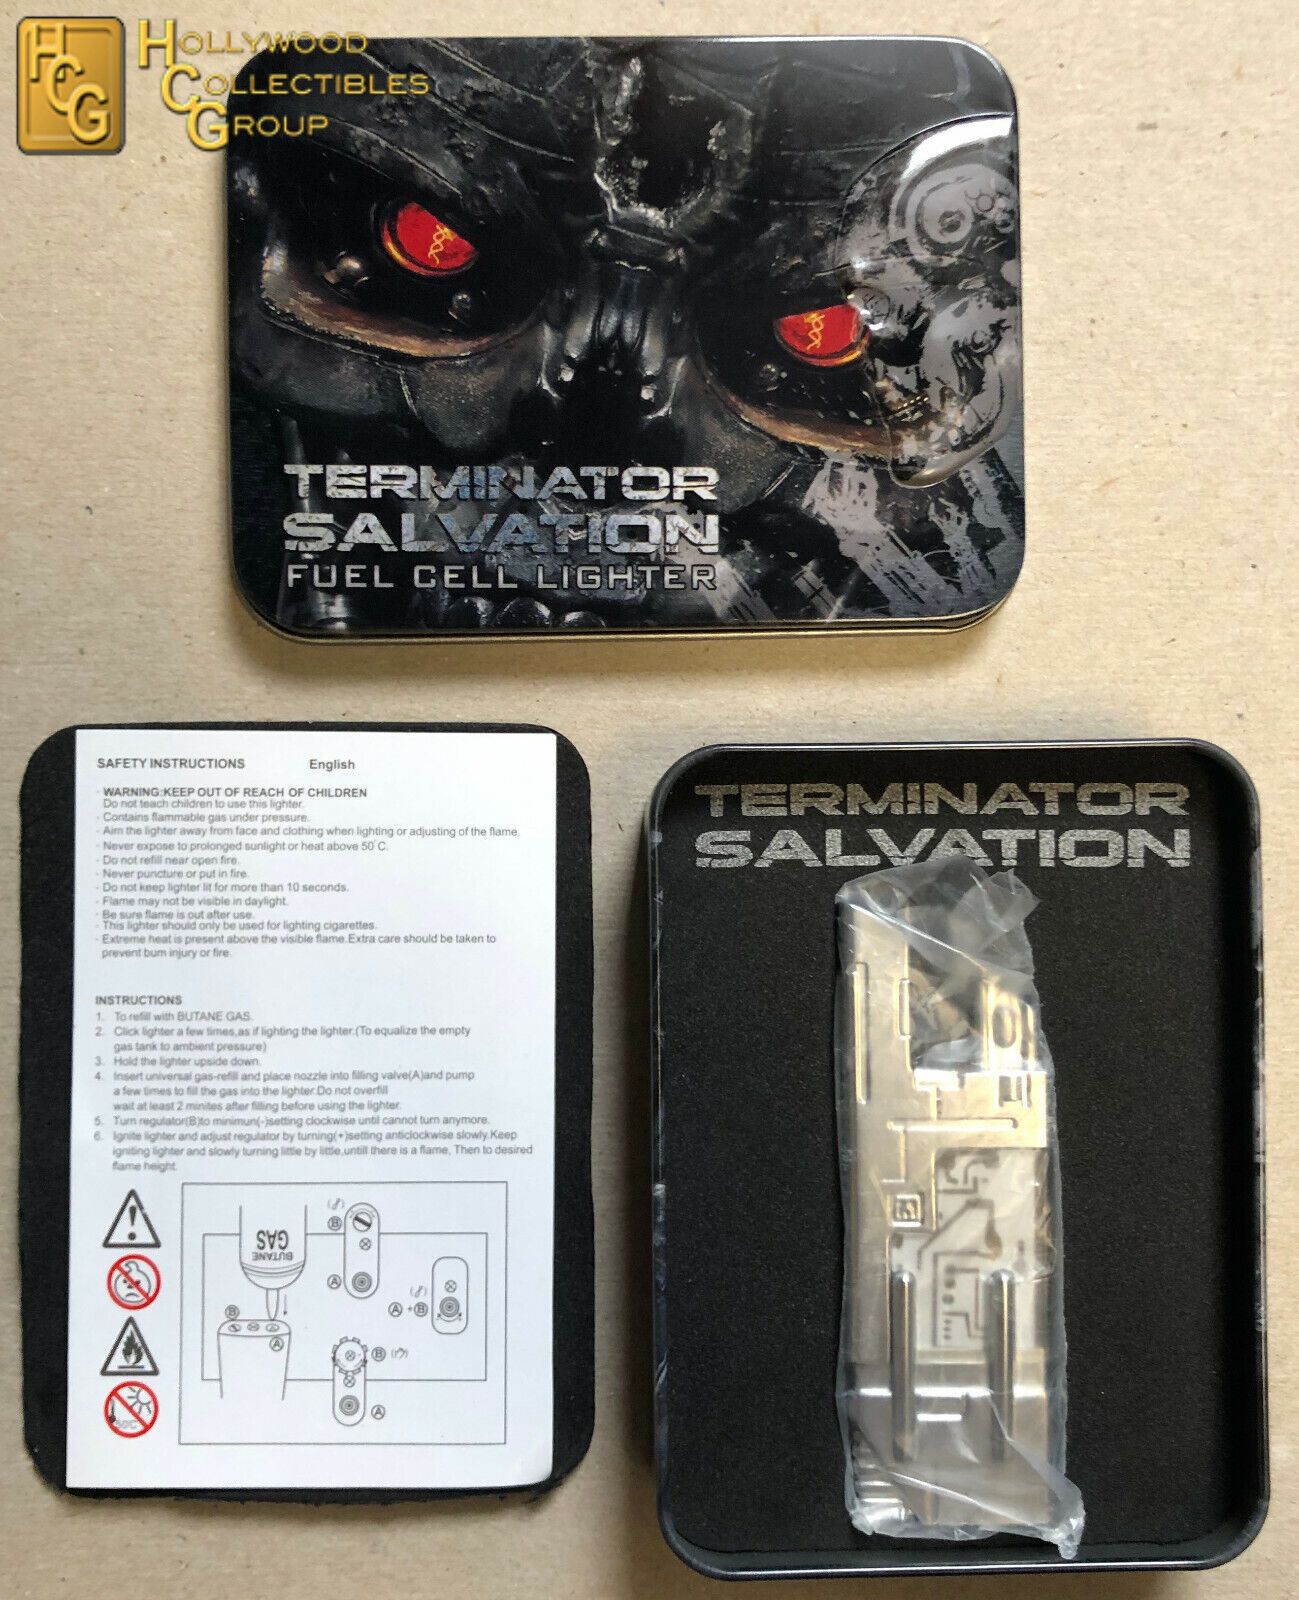 Hollywood Collectibles Group Terminator Salvation Fuel Cell Lighter New In Stock